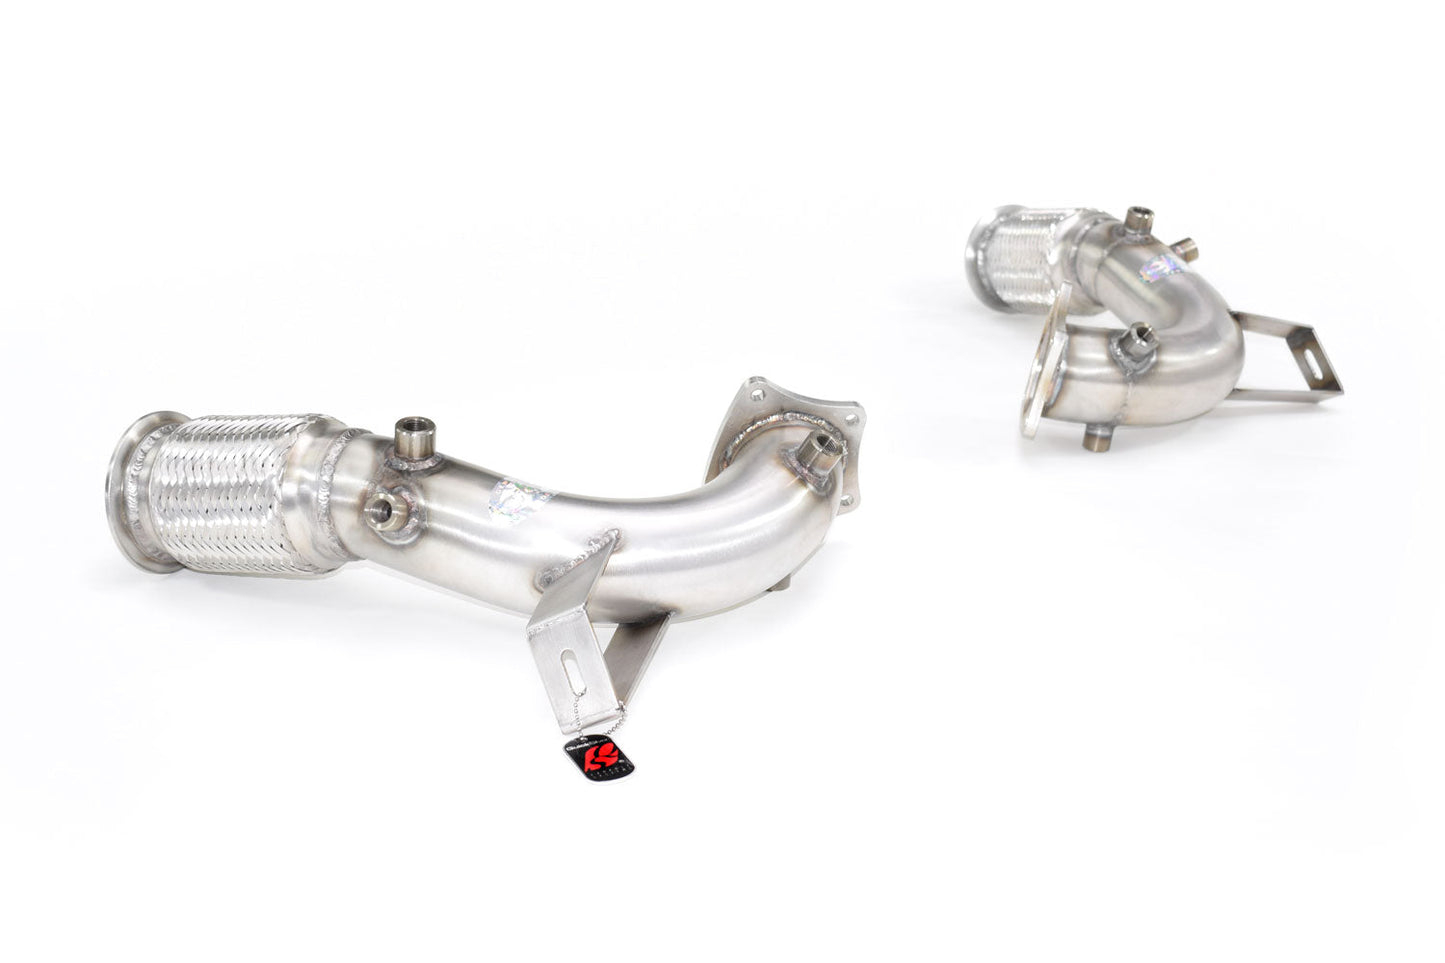 Audi R8 V10 (with GPFs) Sport Exhaust with Sound Architect™ OR GPF delete pipes (2020 on EURO Spec) - QuickSilver Exhausts